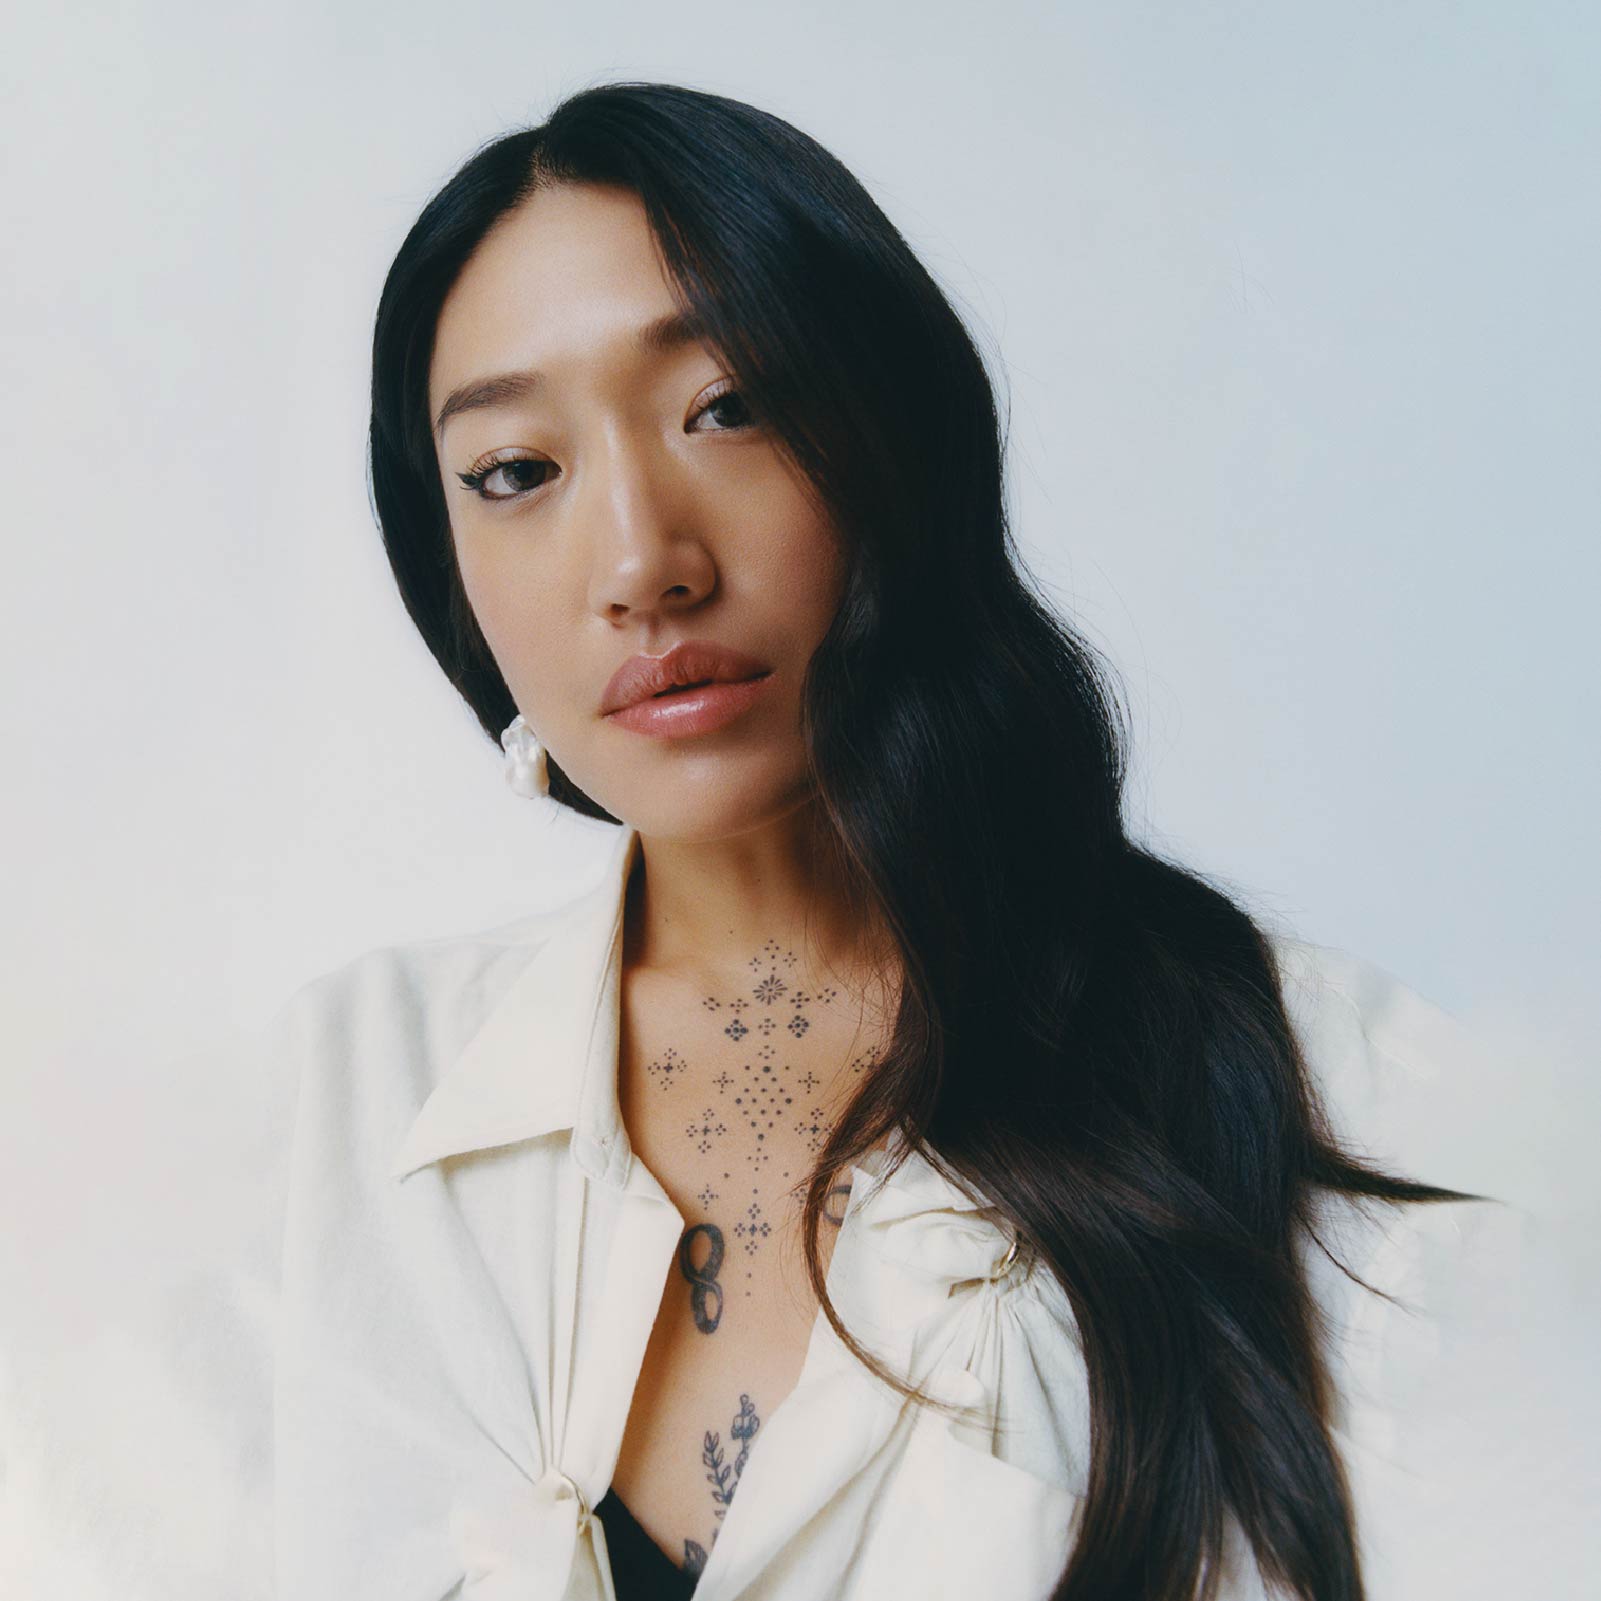 Peggy Gou discusses Asian excellence and her collaboration with